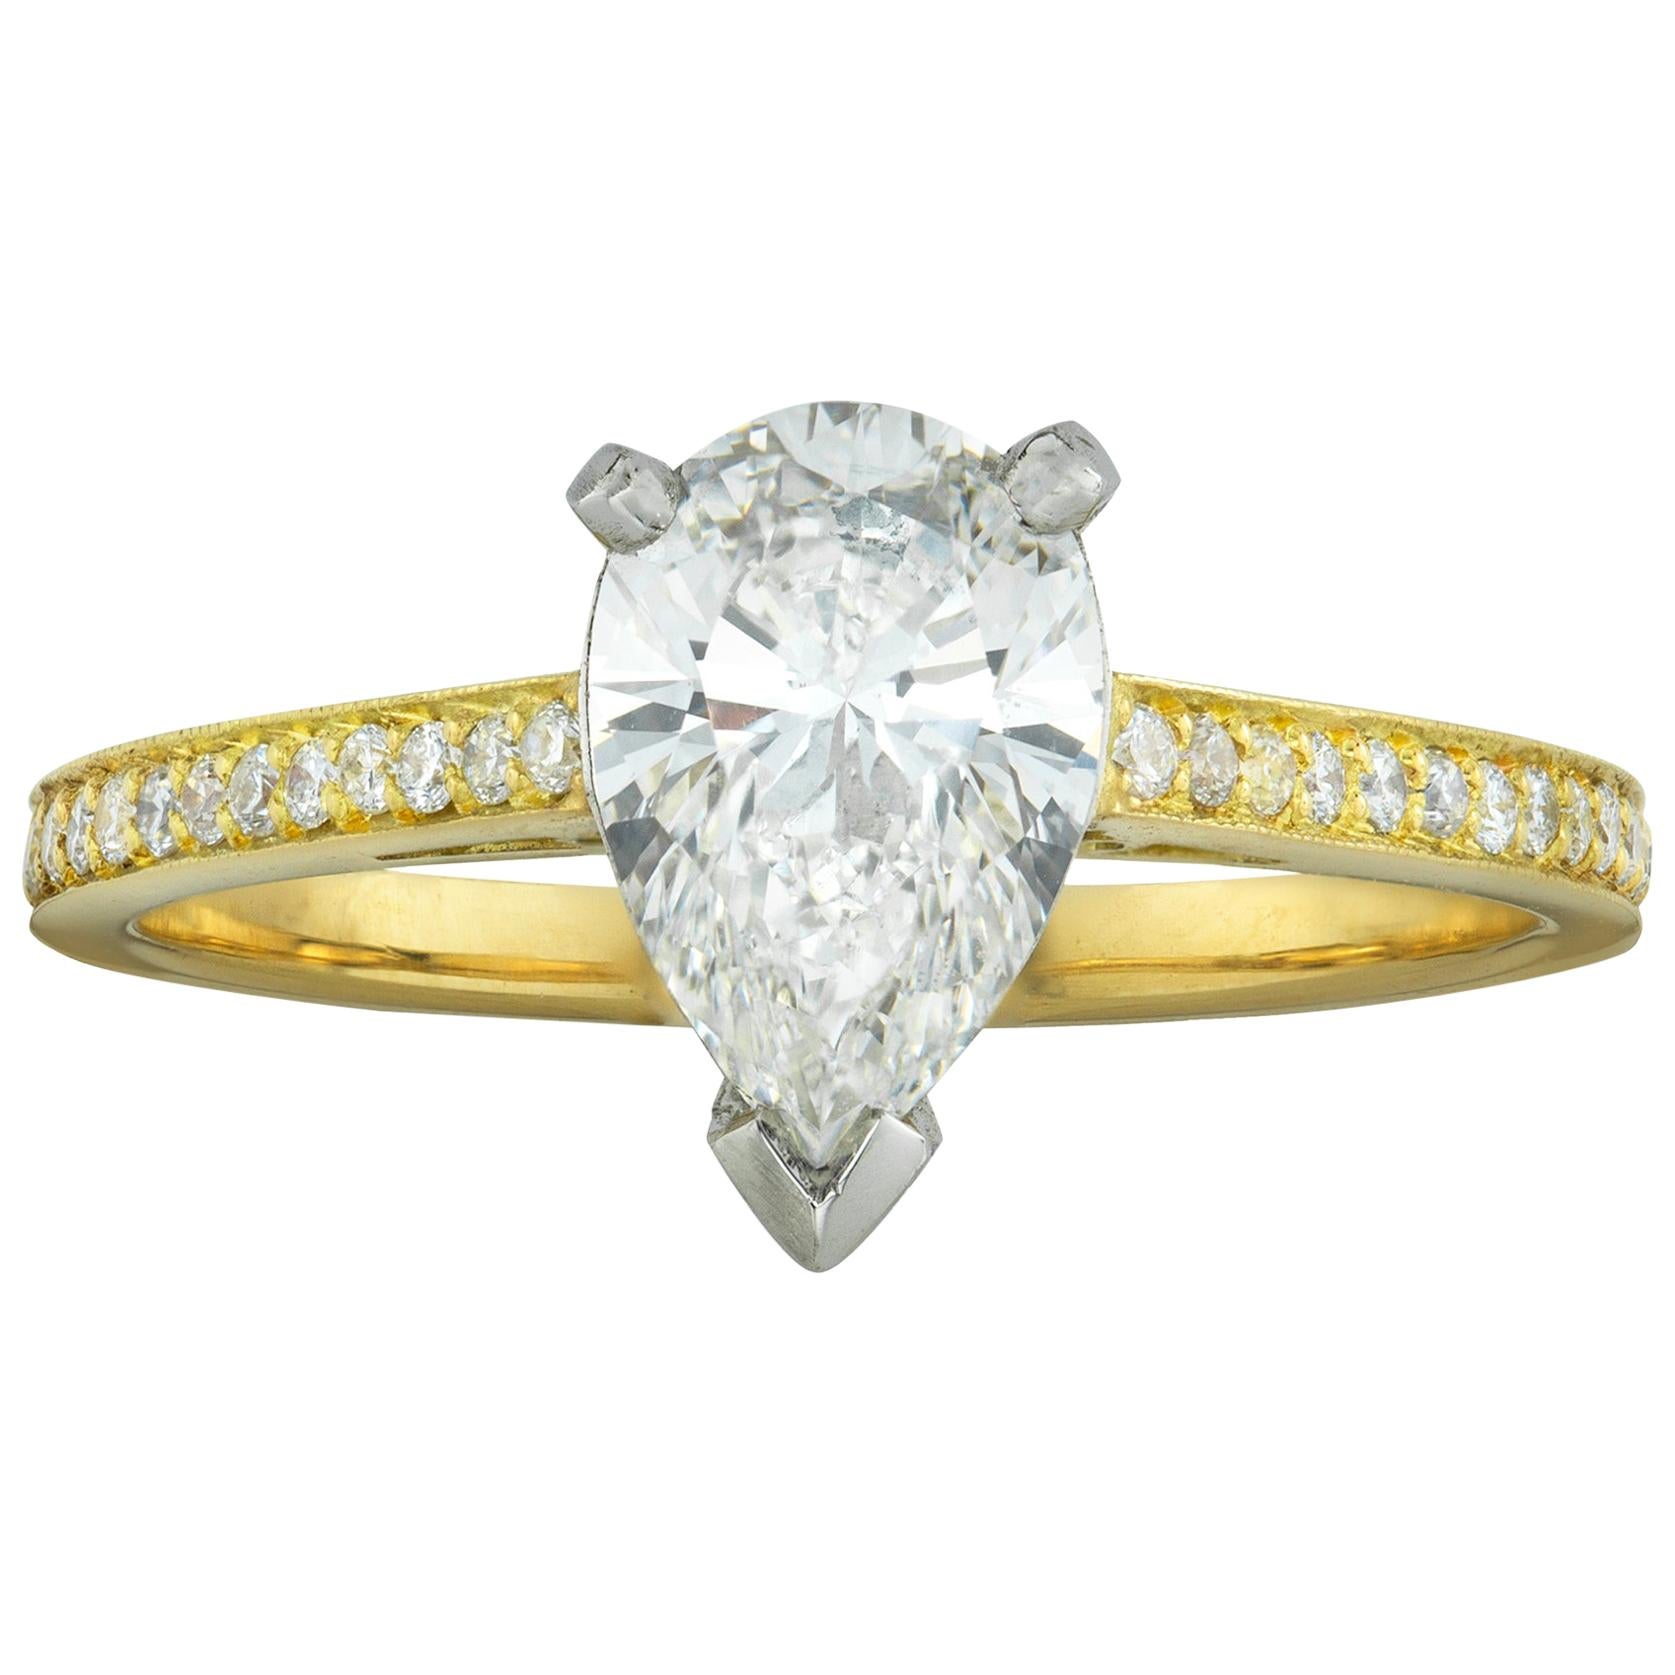 GCS Certified 1.13 Carat Pear-Shaped Solitaire Diamond Ring